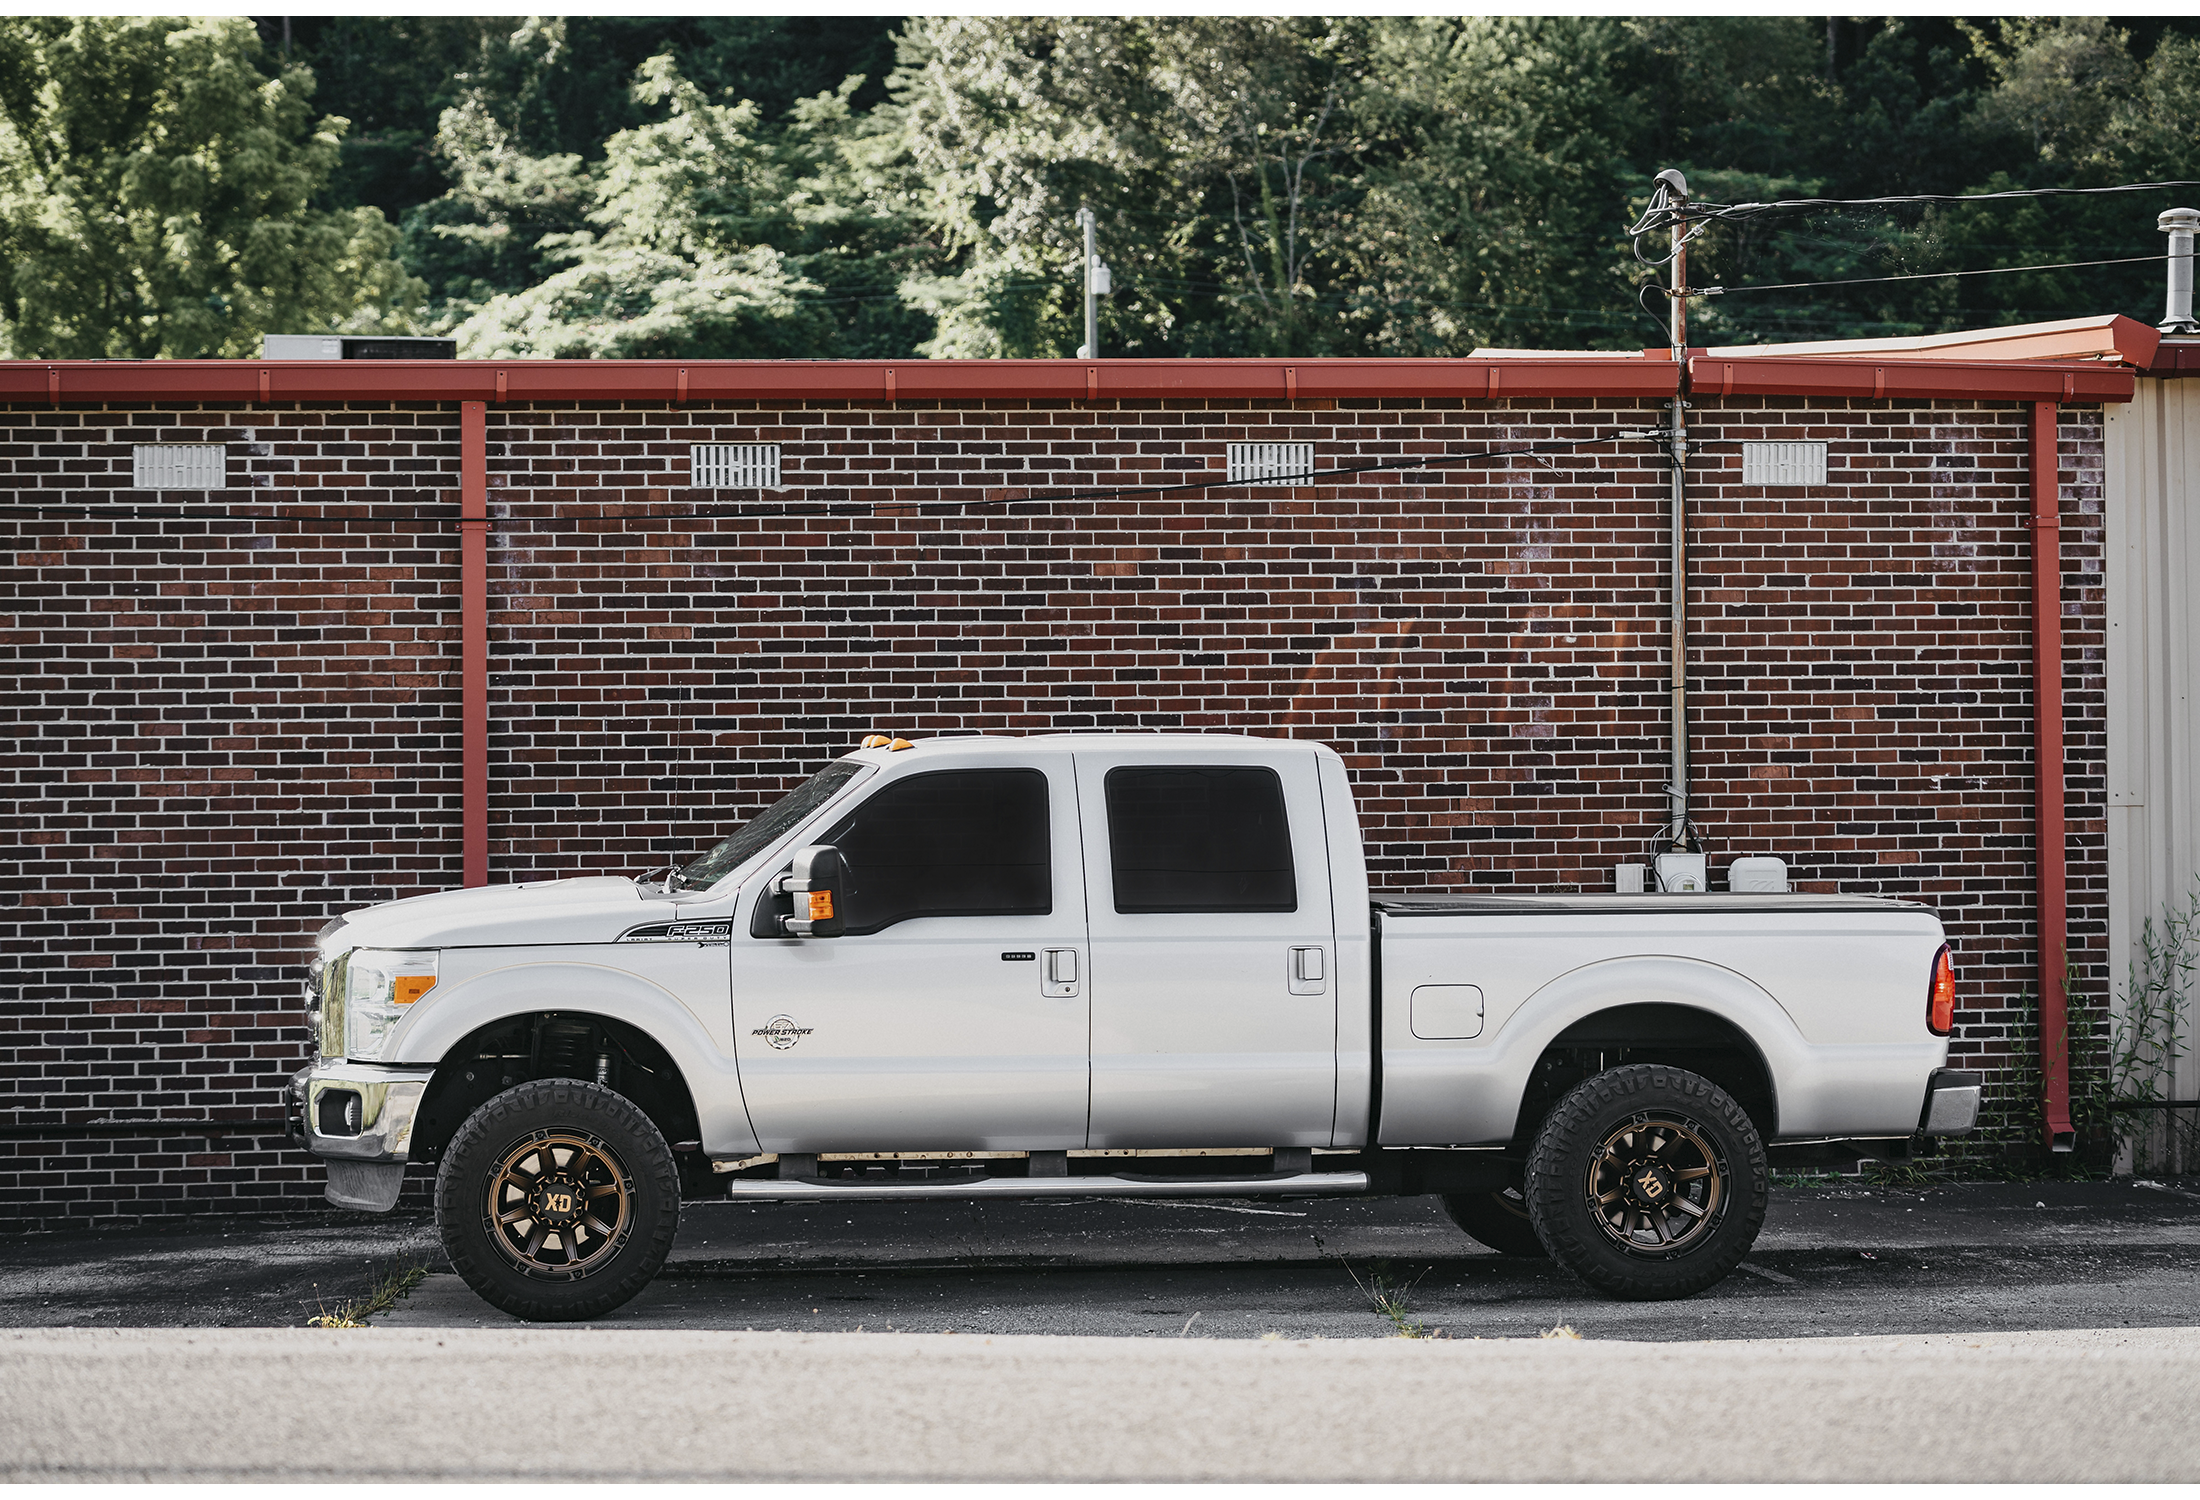 2021 Ford F250